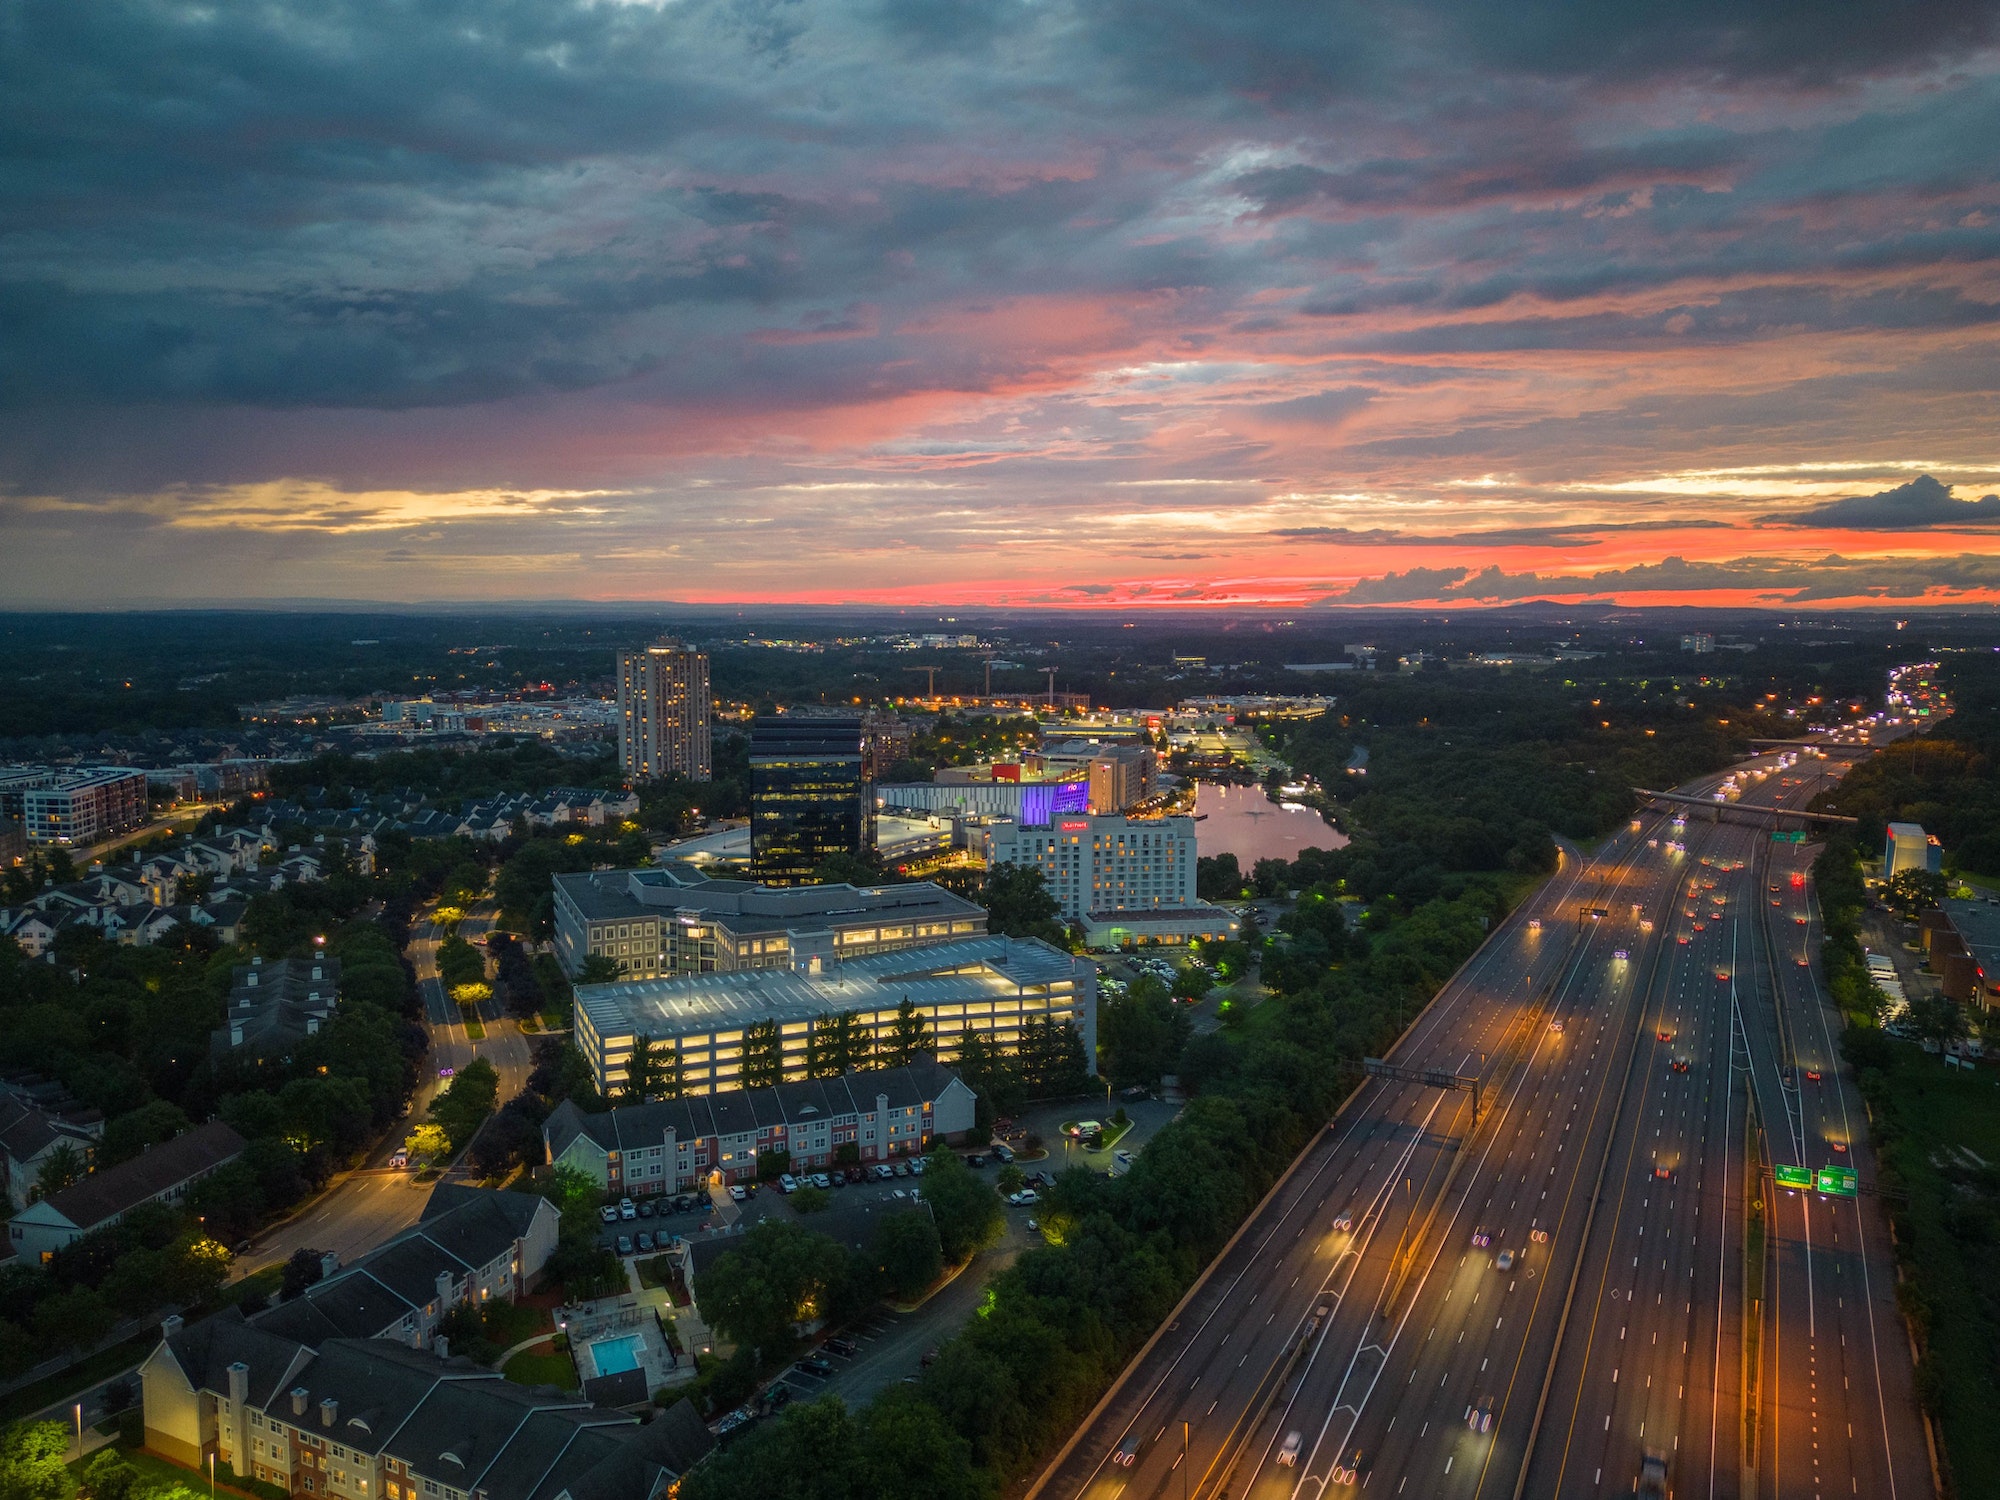 Aerial view of illuminated Gaithersburg cityscape with busy highway against sunset sky in Maryland